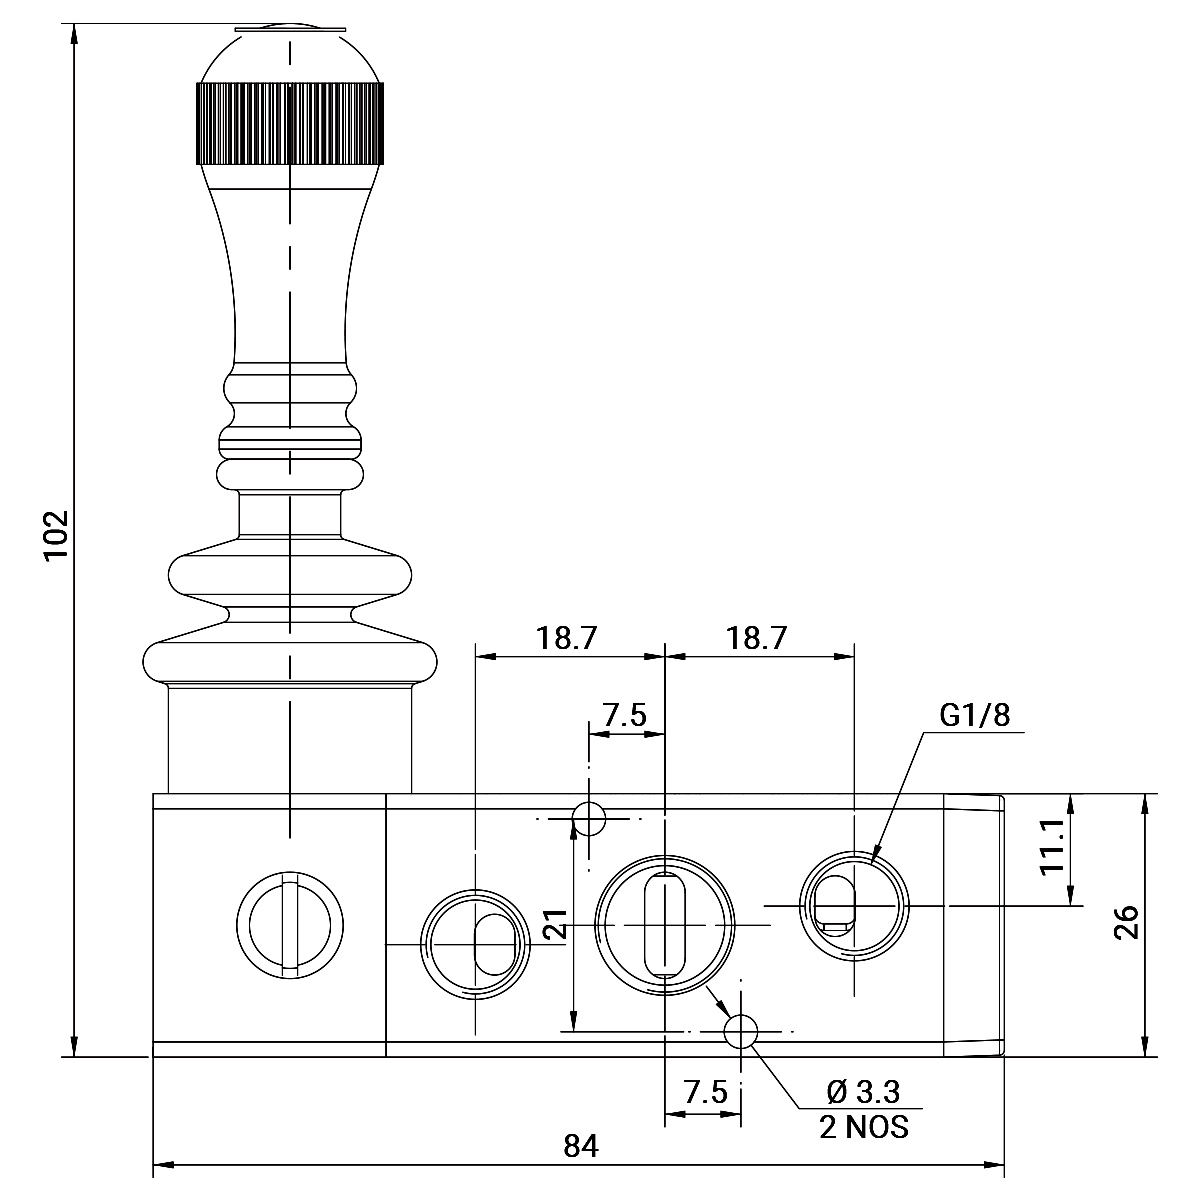 5/3 Hand Lever Valve Manual Return Manufacturers Suppliers in Worldwide